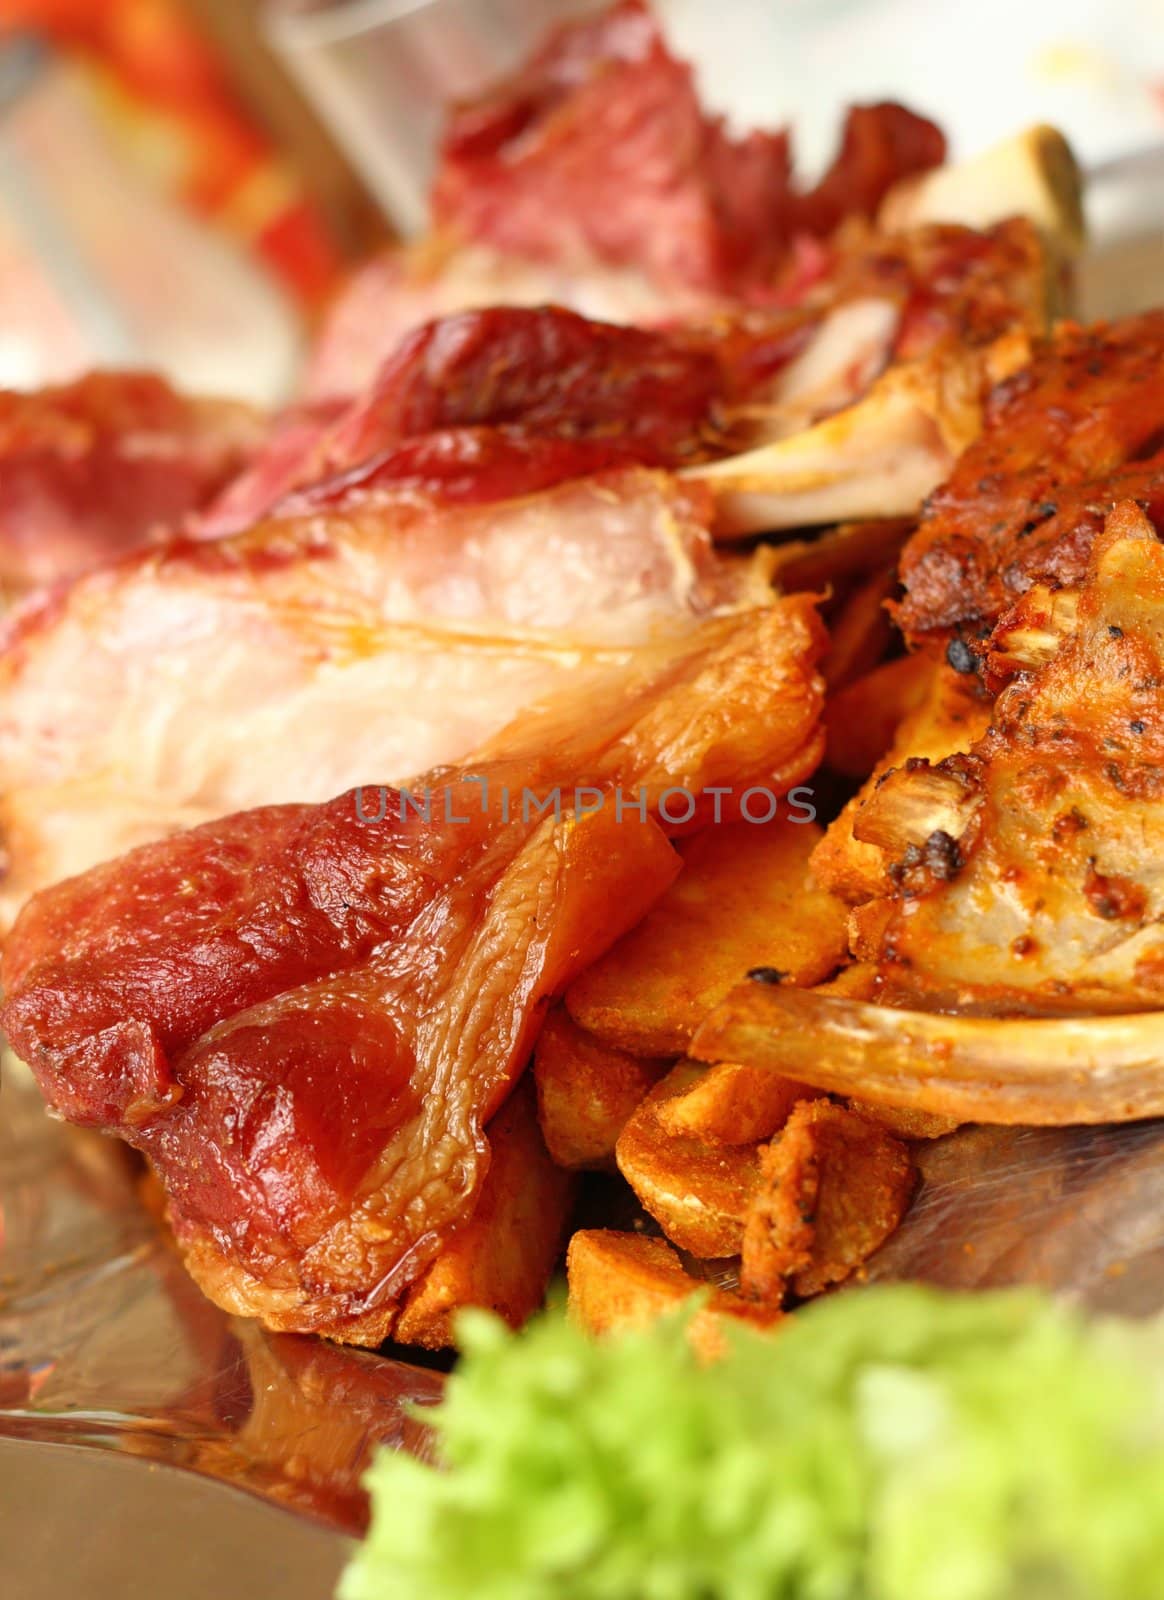 cooked bacon with salad by taviphoto